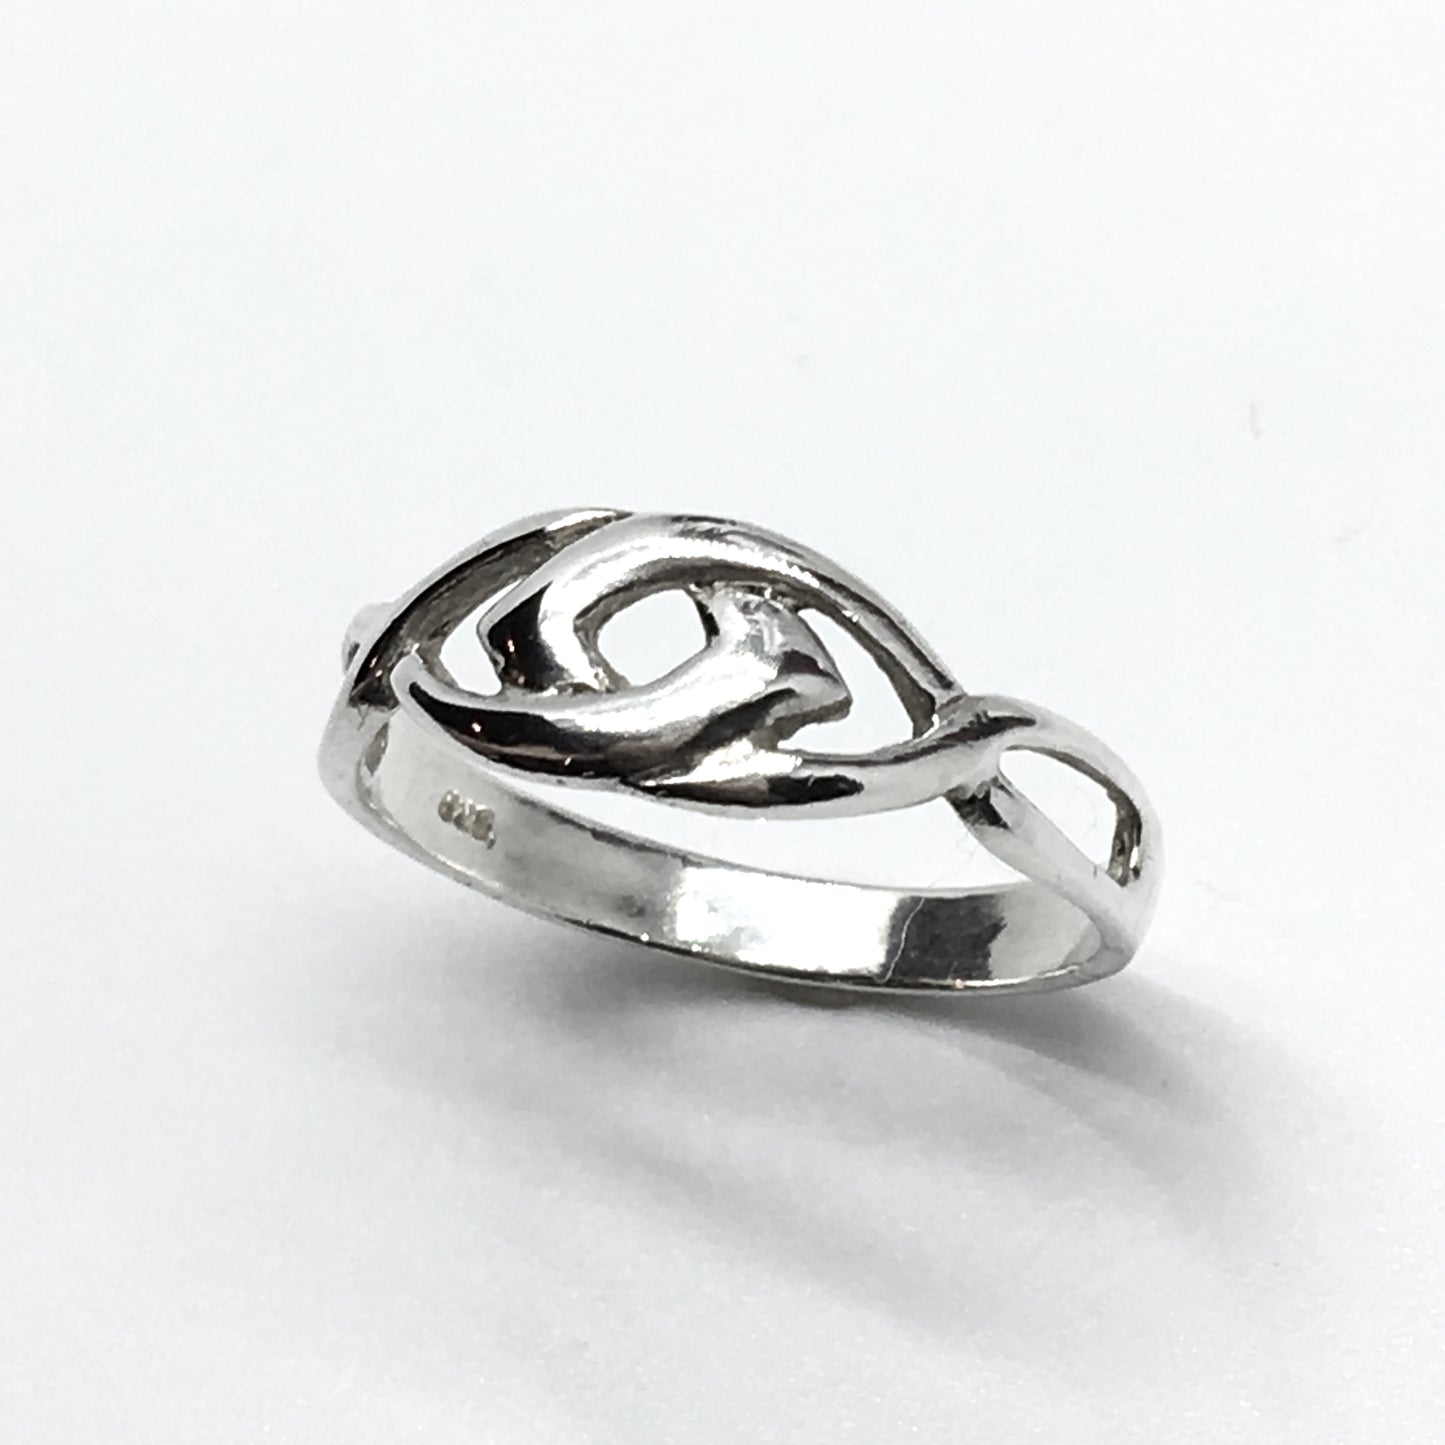 Silver Rings | Sterling Silver Unique Double Eye Design Ring sz 8 | Mens Jewelry